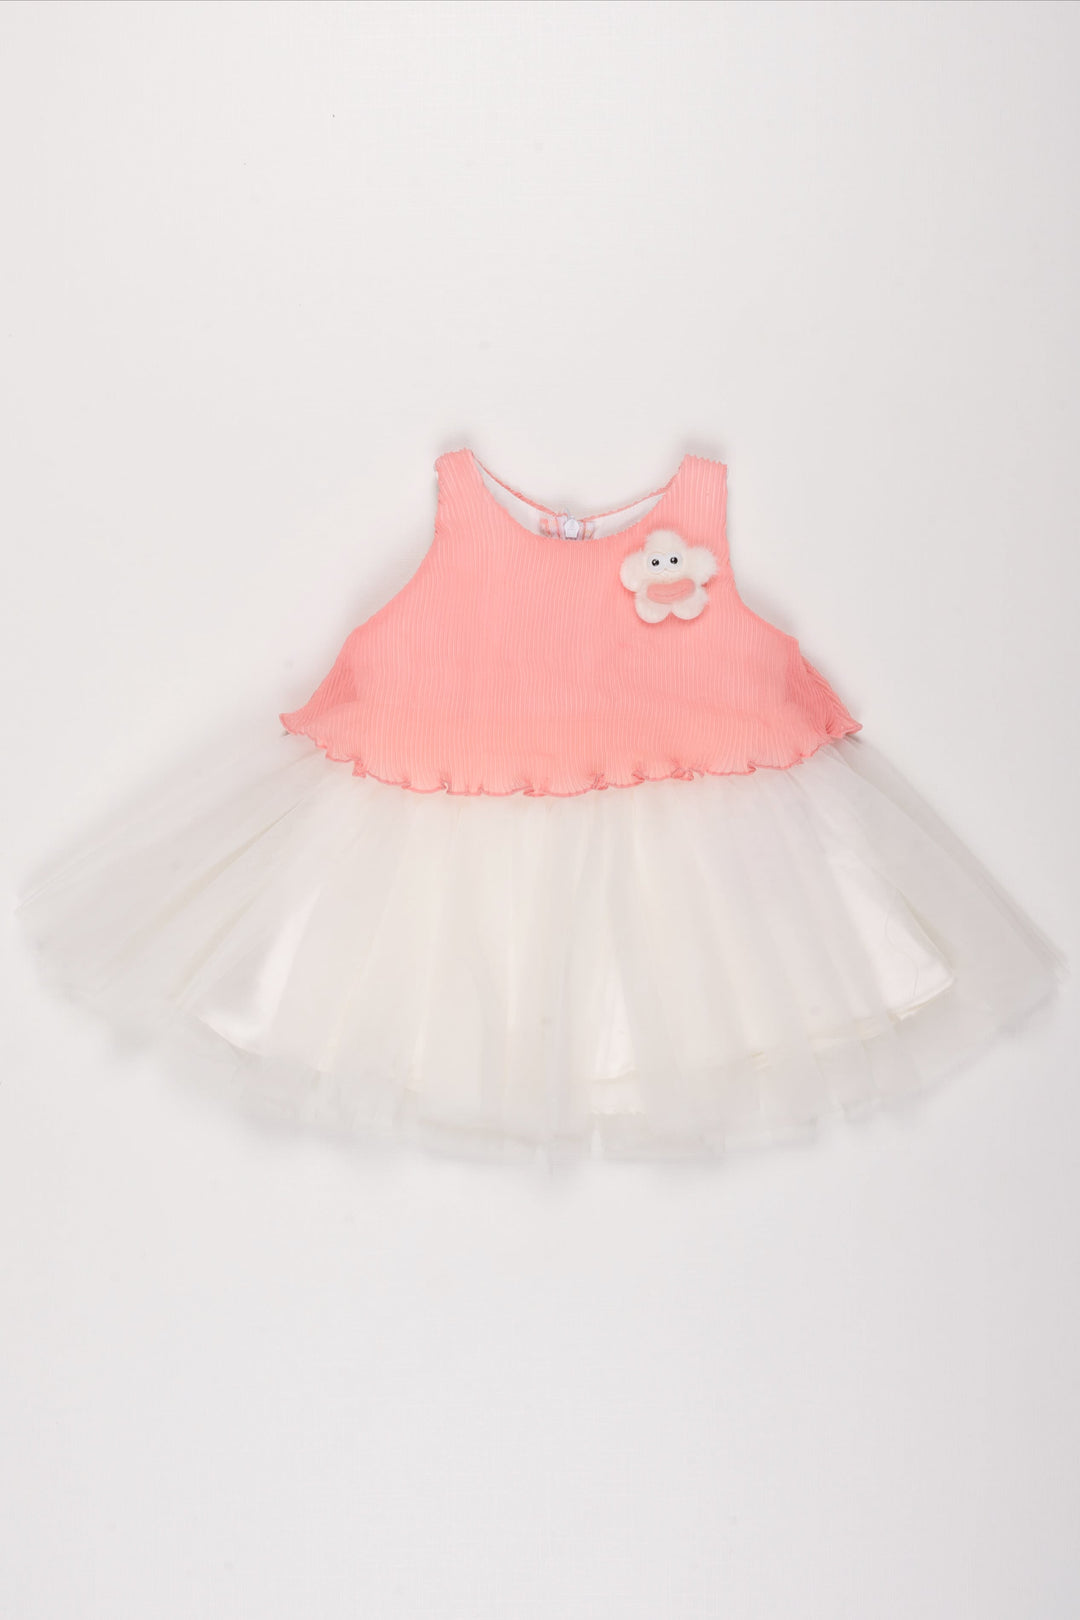 The Nesavu Girls Tutu Frock Pink and White Tulle Party Dress with Charming Accents for Girls Nesavu 12 (3M) / Pink / Plain Net PF170A-12 Girls Pink Tulle Party Dress | White Skirt with Pink Bodice Dress | The Nesavu